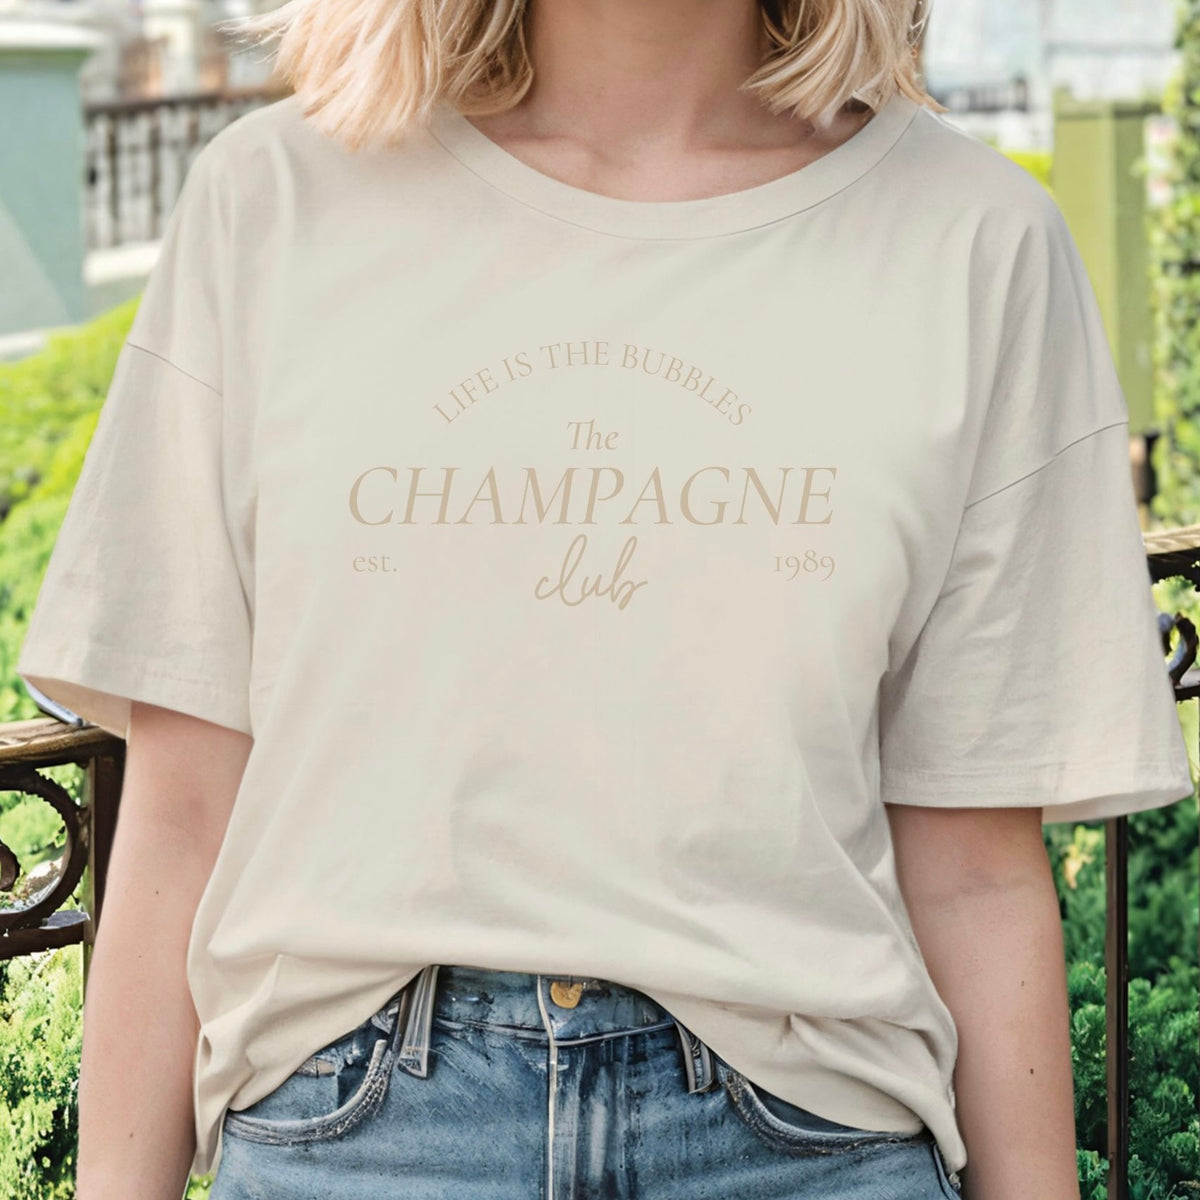 Life is the Bubbles The Champagne Club Park Shirt